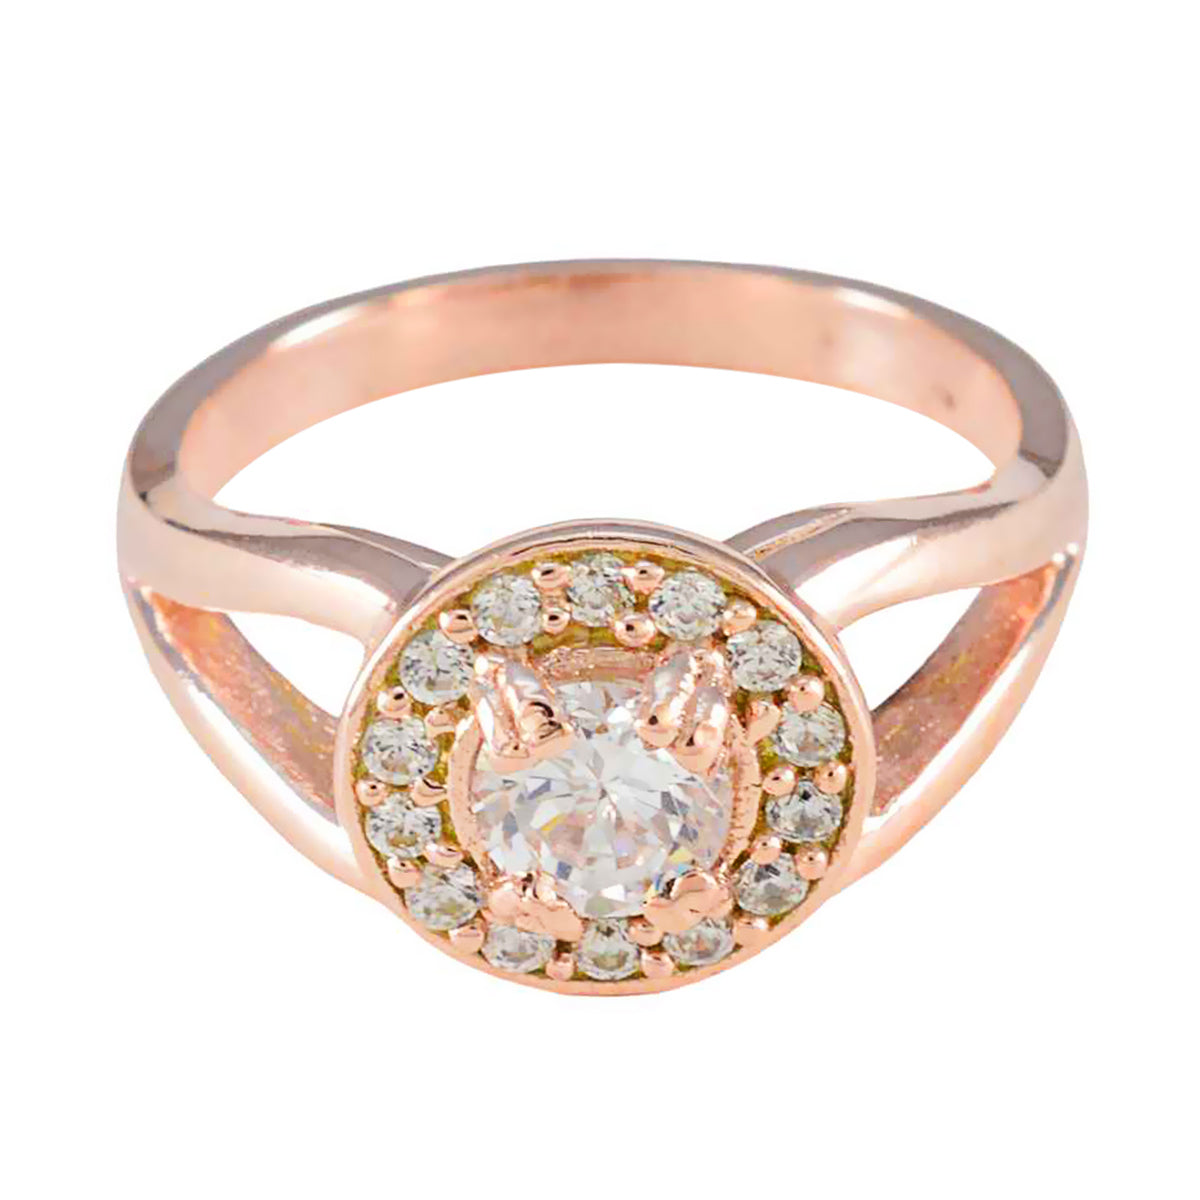 Riyo Classical Silver Ring With Rose Gold Plating White CZ Stone Round Shape Prong Setting Handmade Jewelry Cocktail Ring